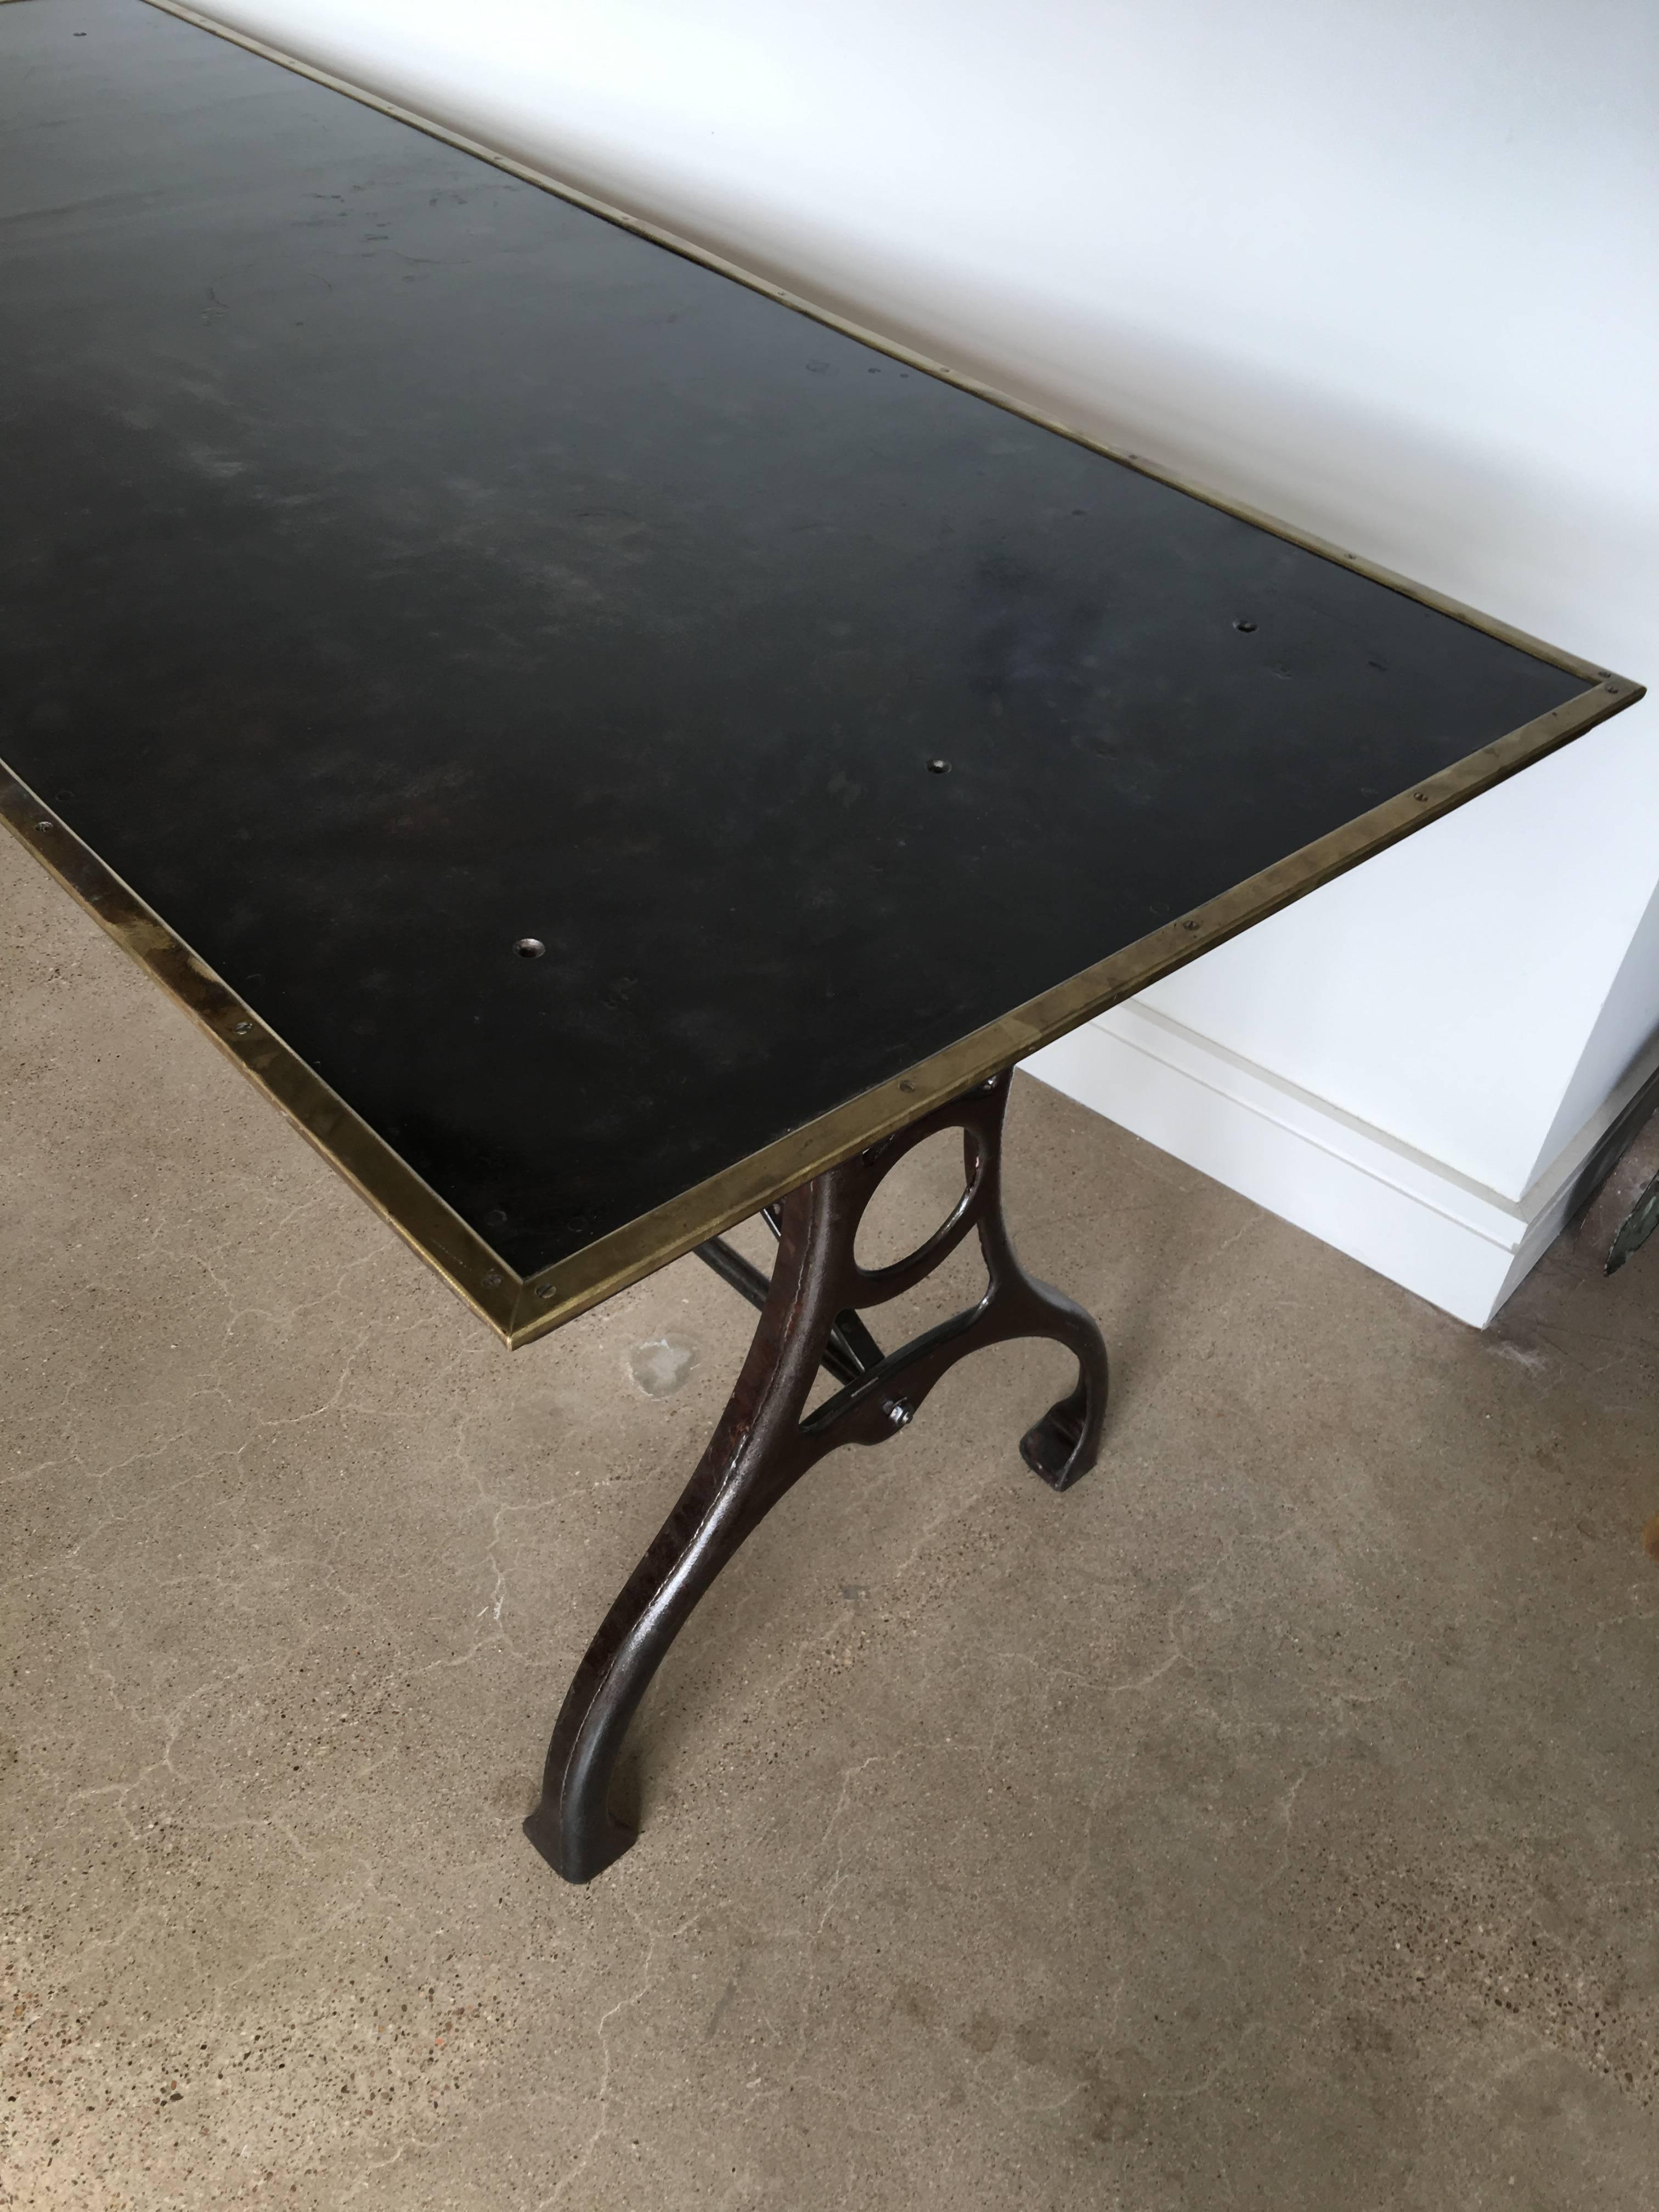 Early Industrial Table From The National Geographic Society 6